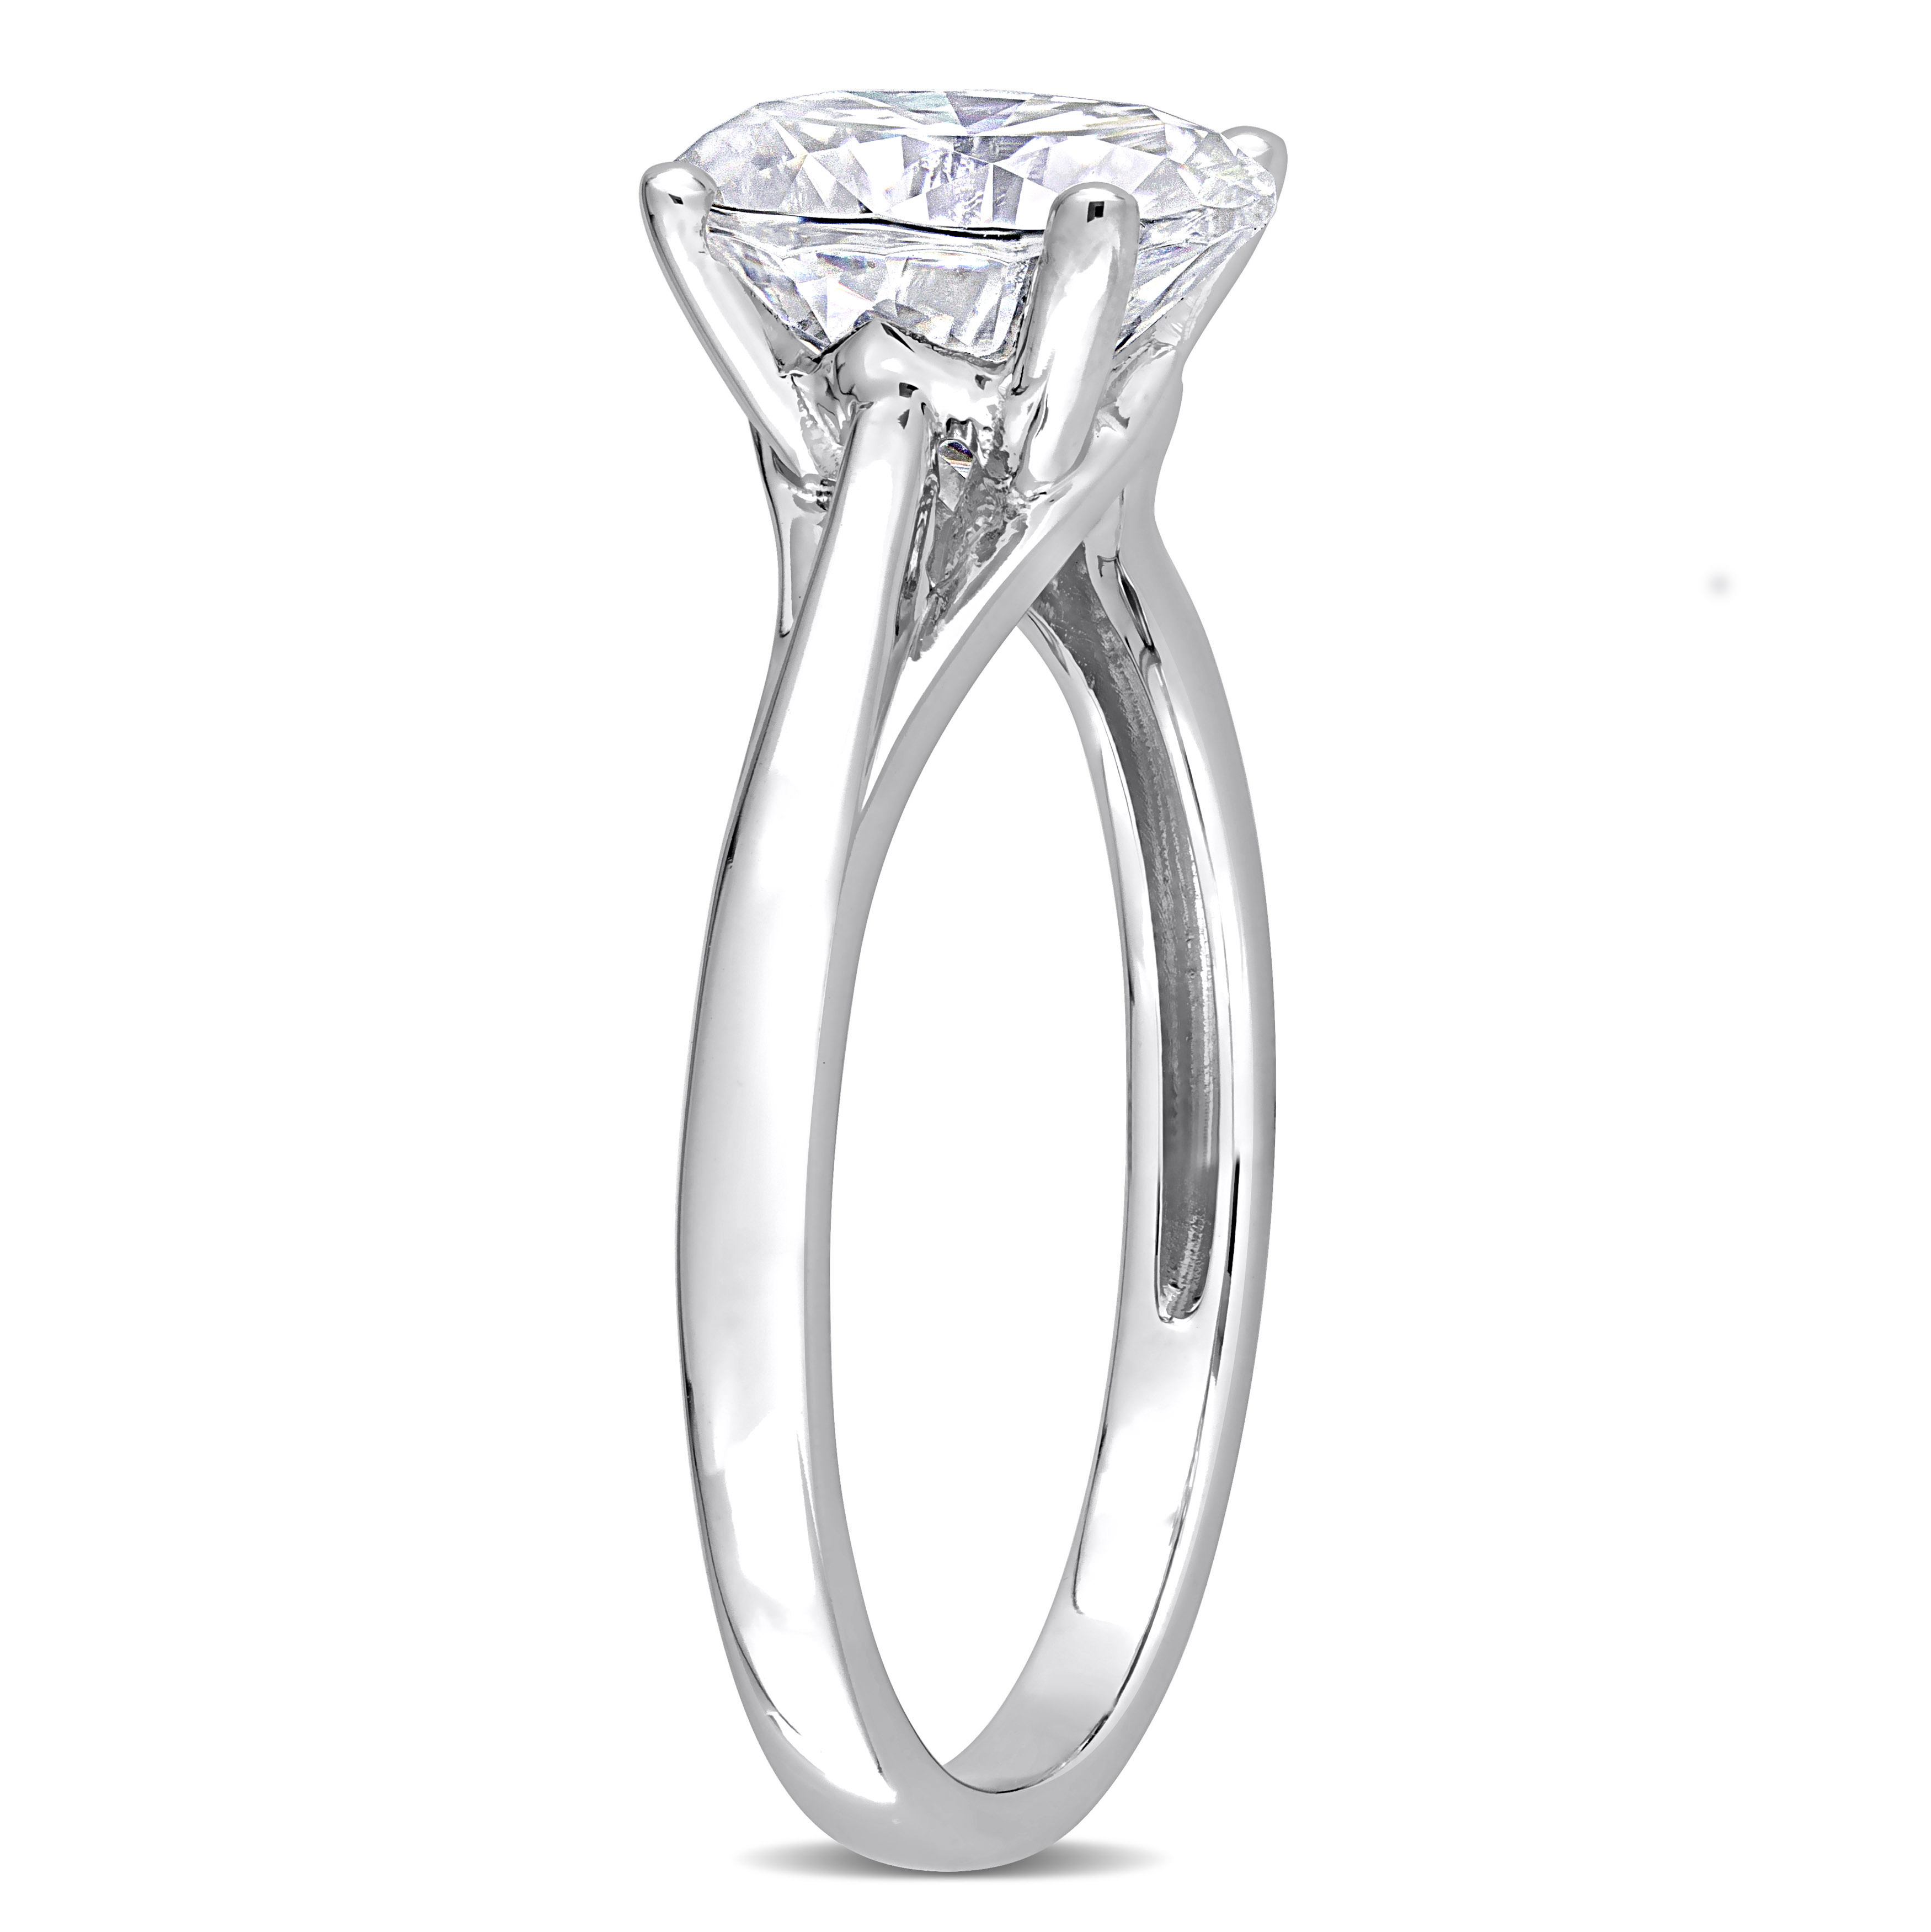 2 CT DEW Oval Shaped Created Moissanite Solitaire Ring in 14k White Gold